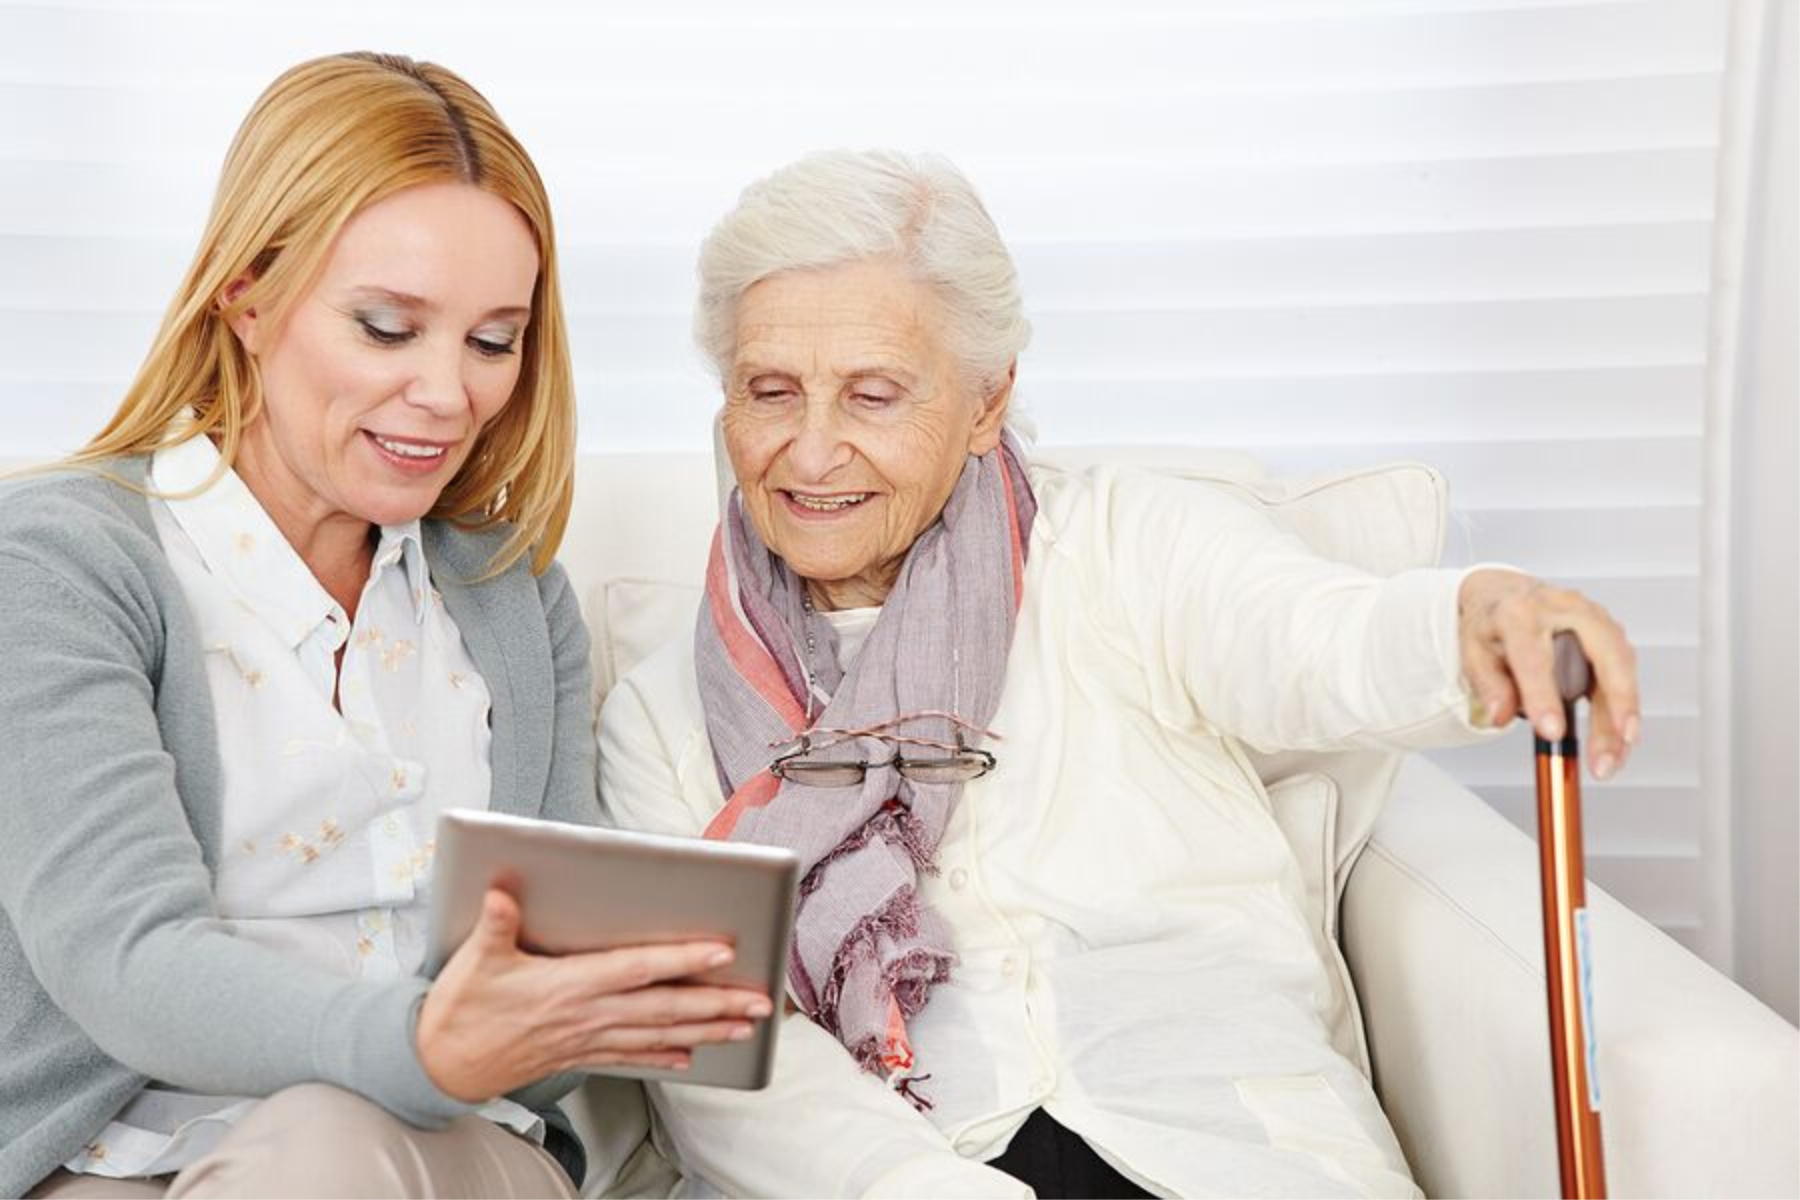 Home Care Services: What Types of Services Do Home Health Care Providers Offer?